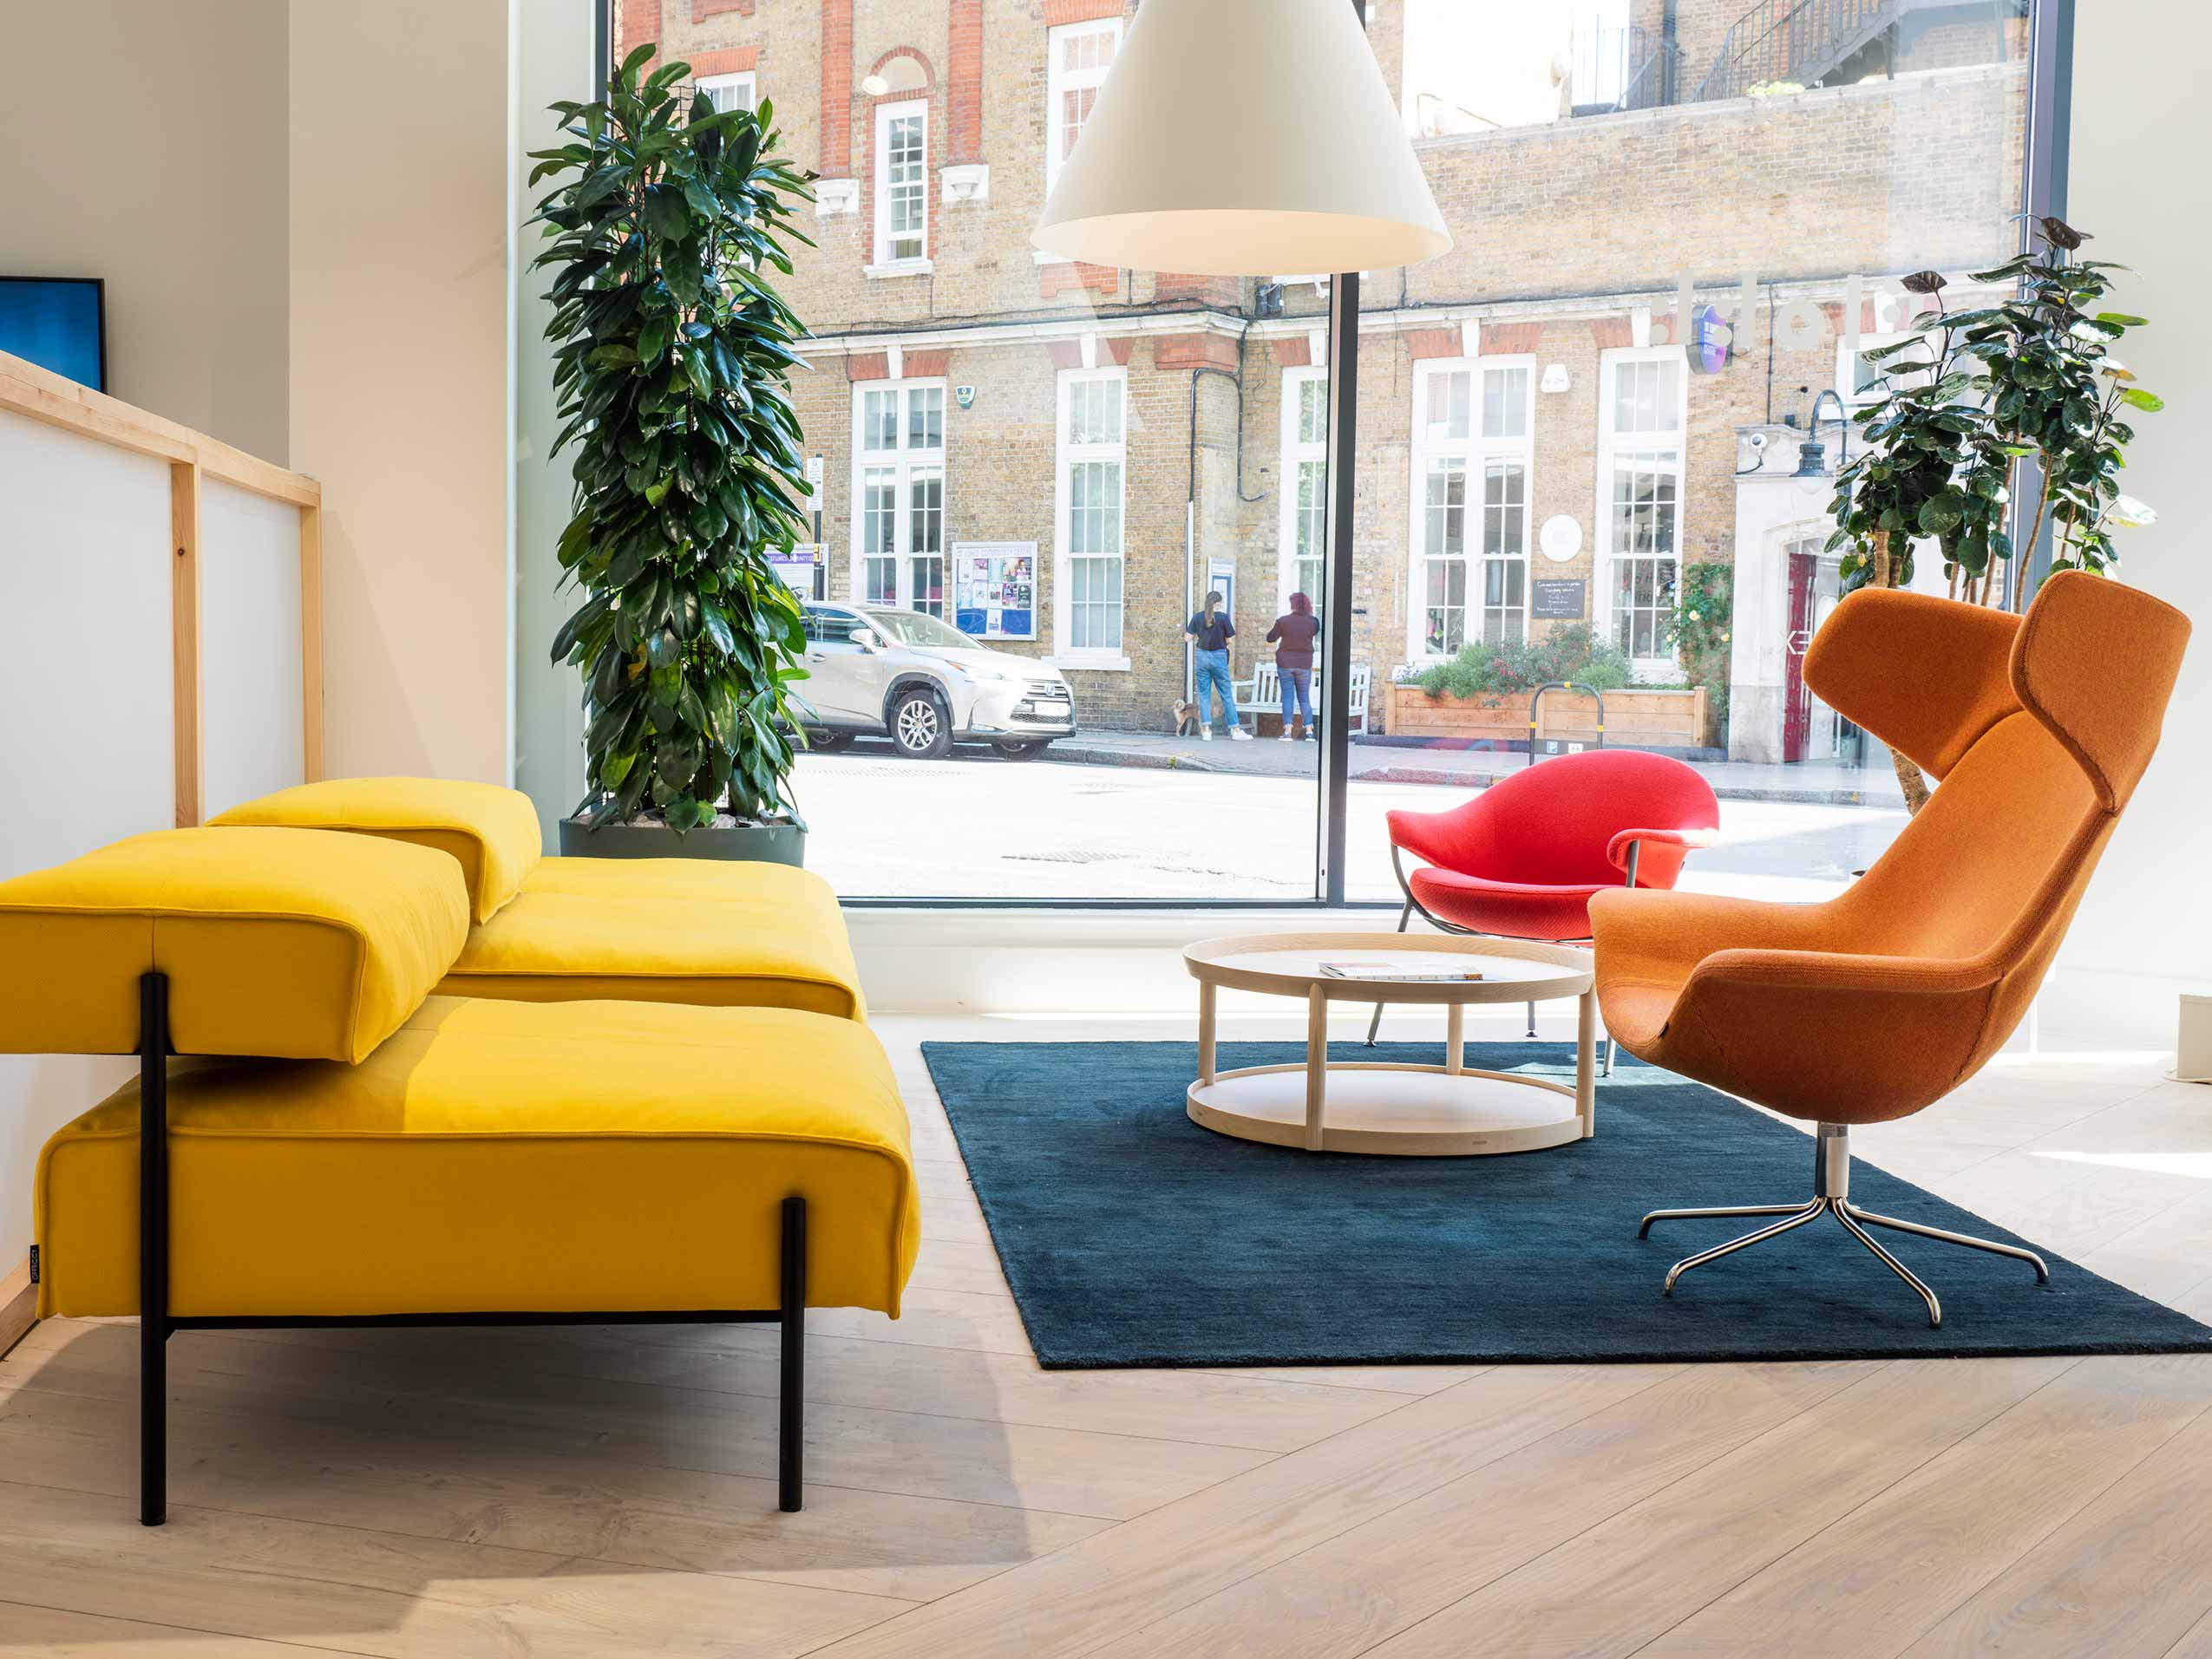 UK Flokk showroom featuring OFfecct yellow sofa, red and orange chairs